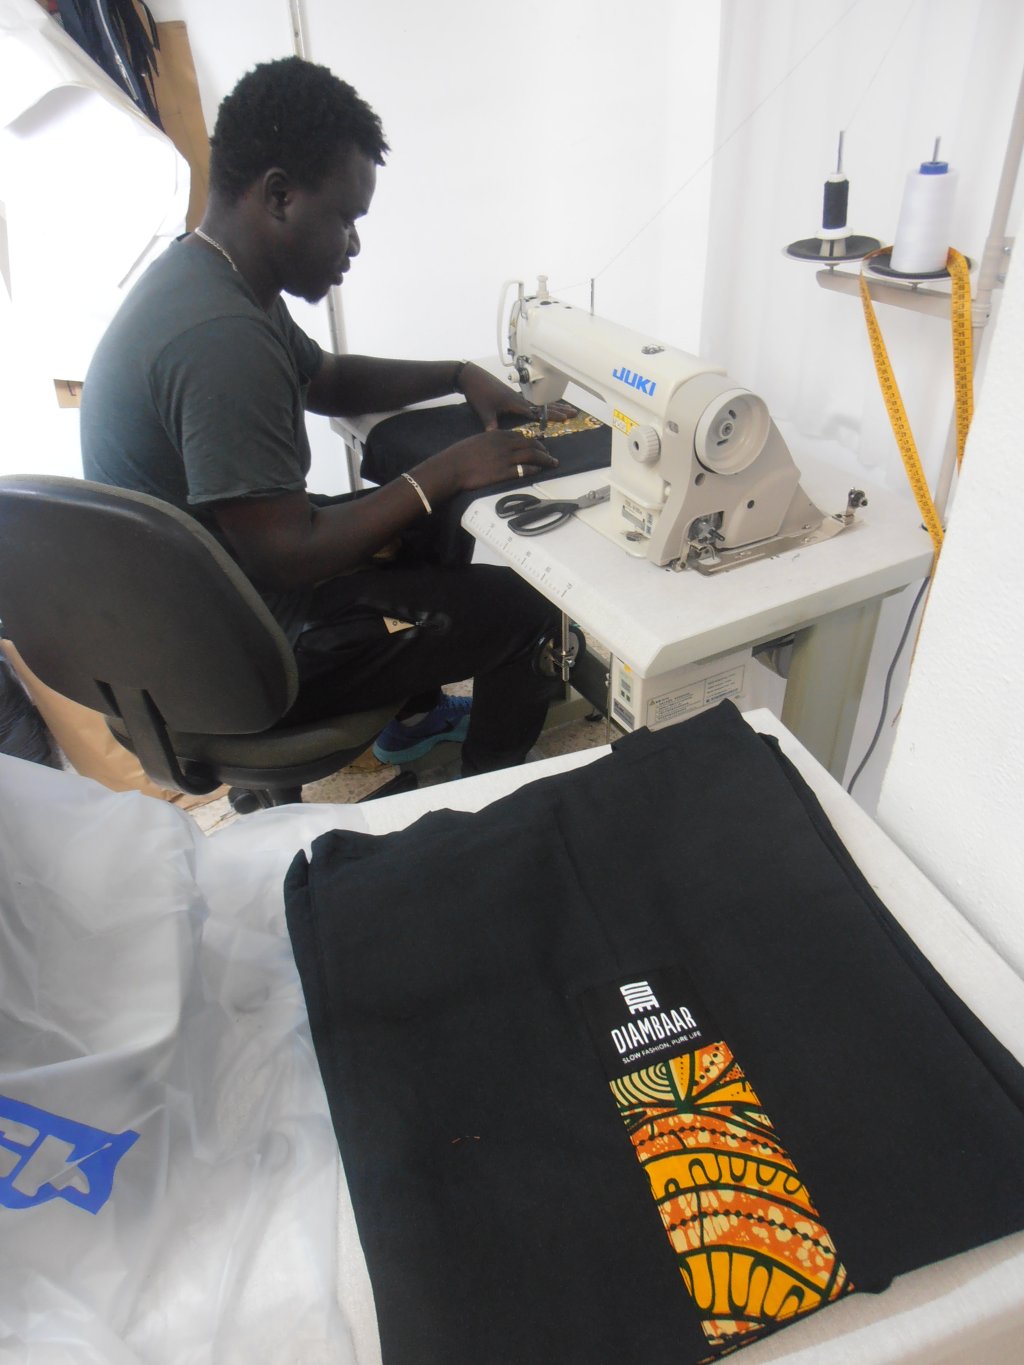 Kewa Sarr, a tailor from Gambia, joined DiomCoop cooperative this year | Photo: Judit Alonso